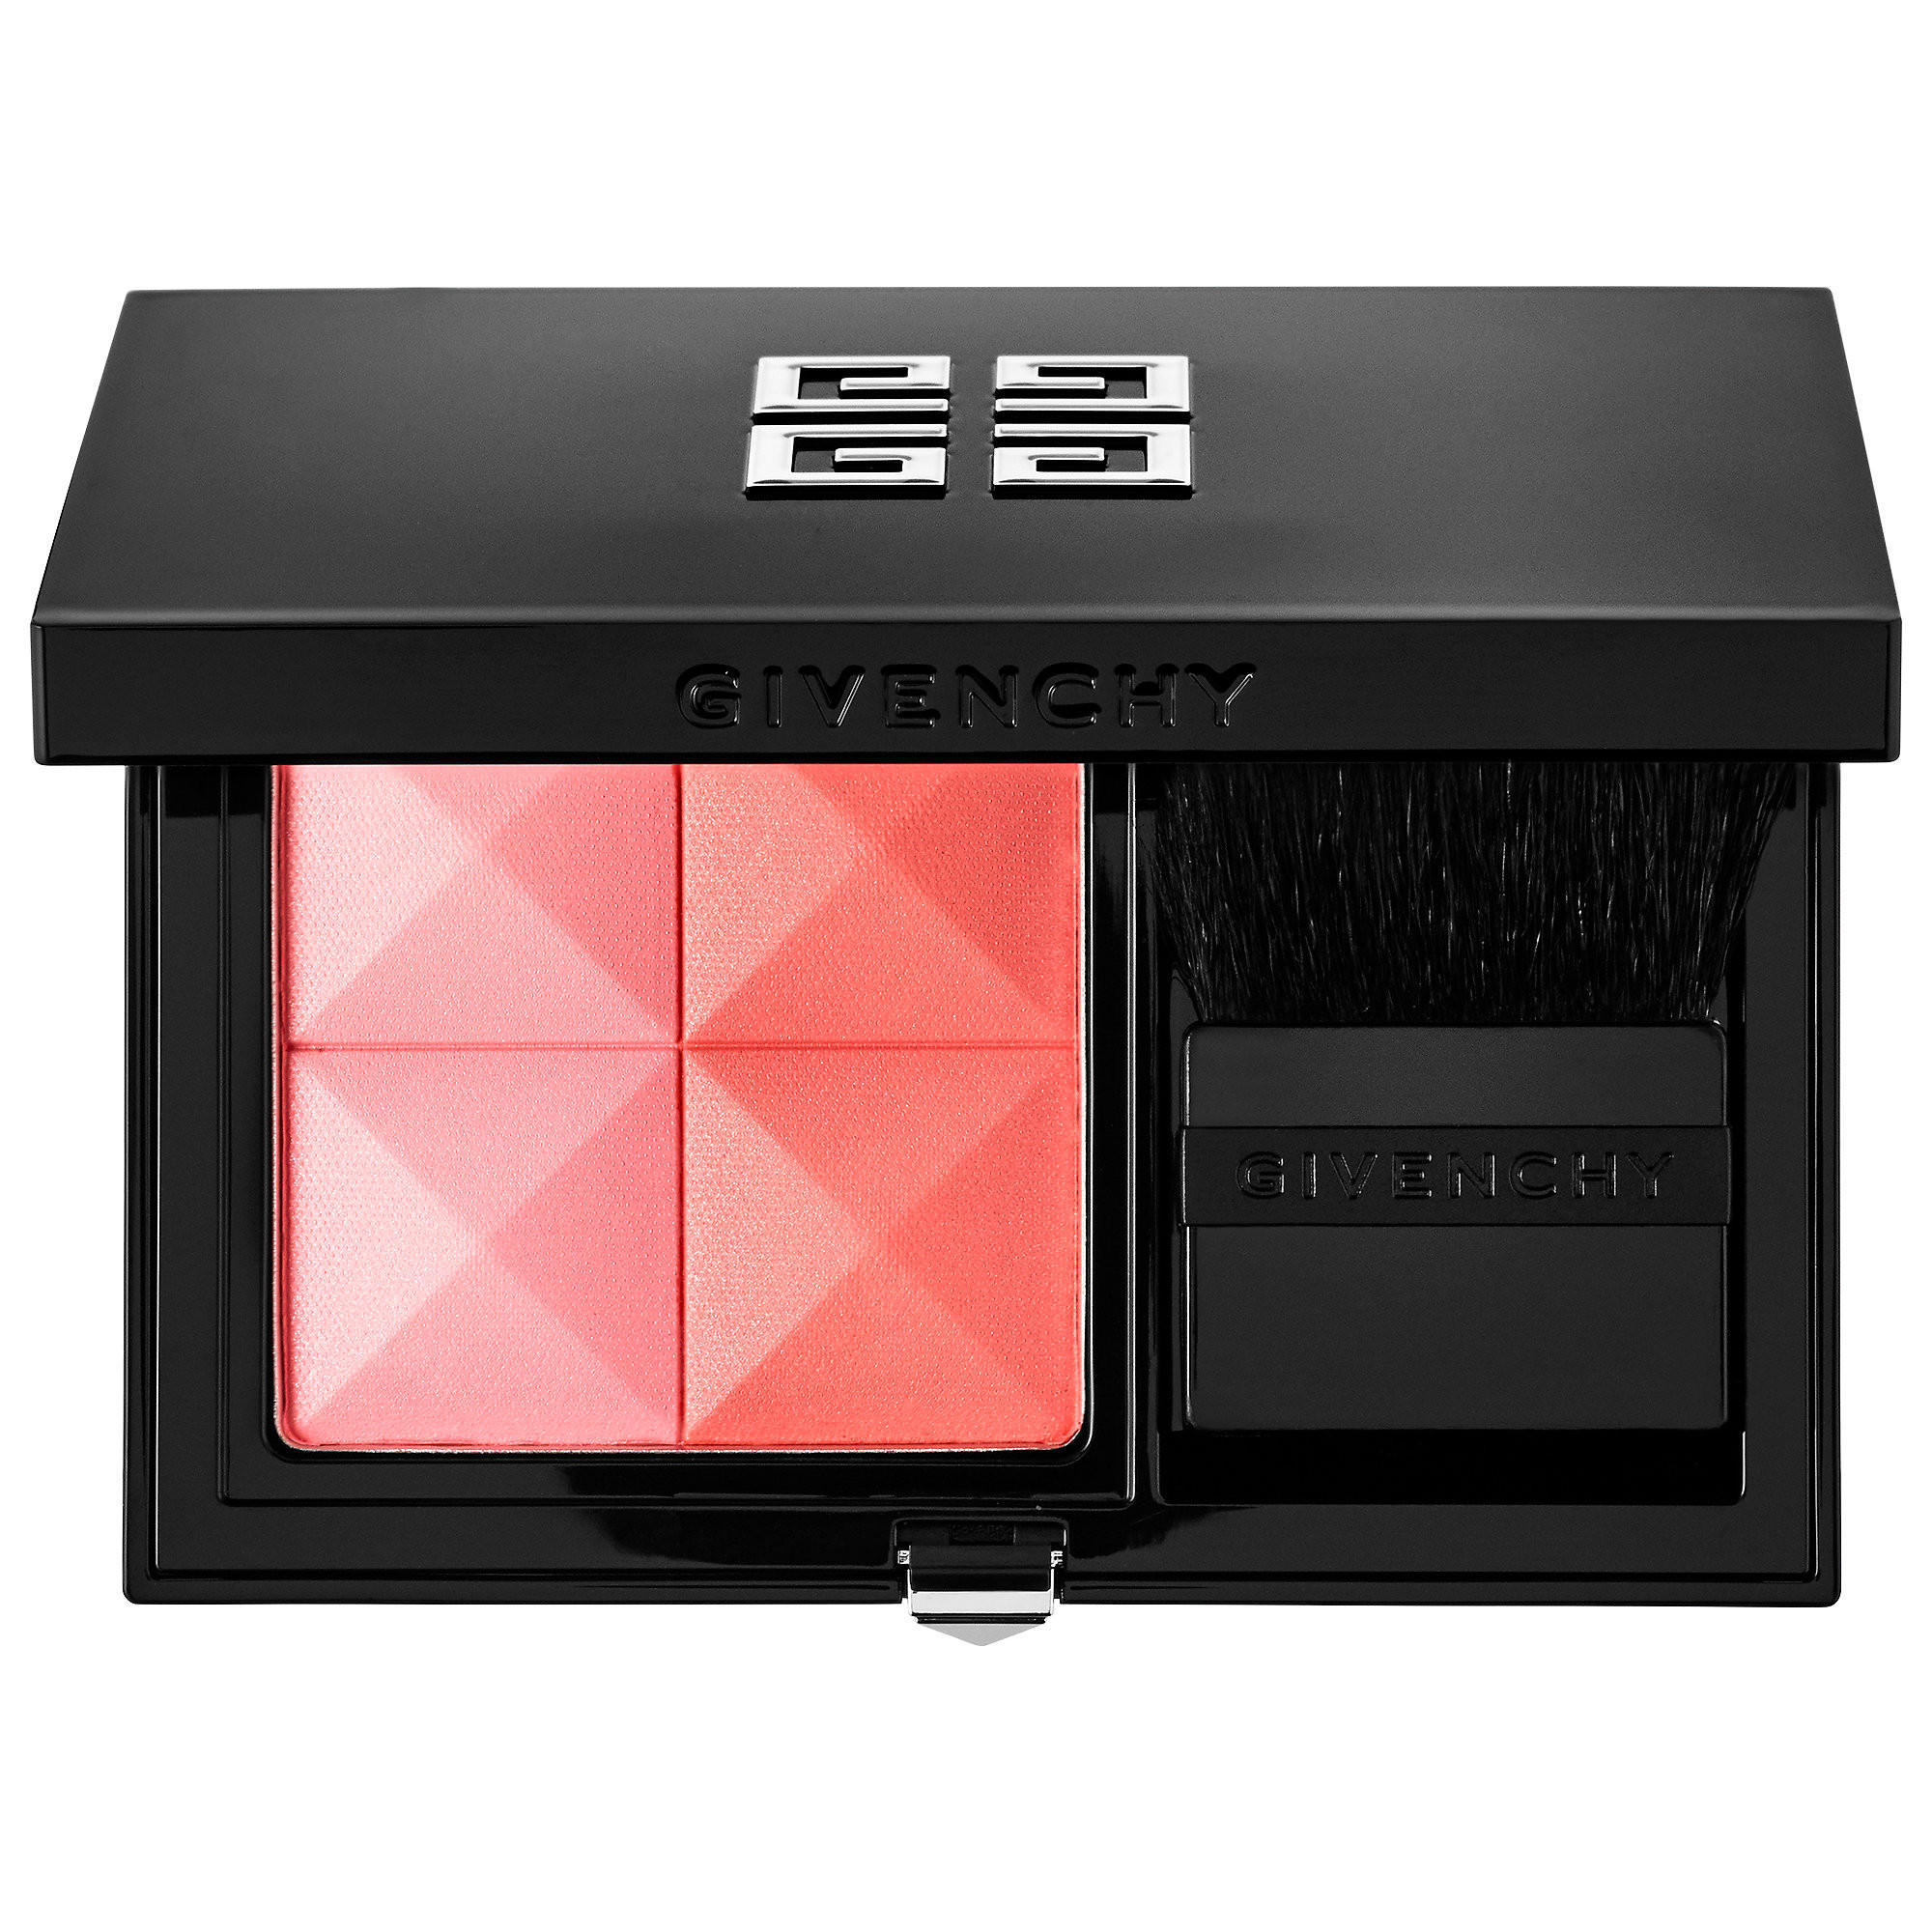 Givenchy Prisme Blush Highlight & Structure Powder Duo Spice 03